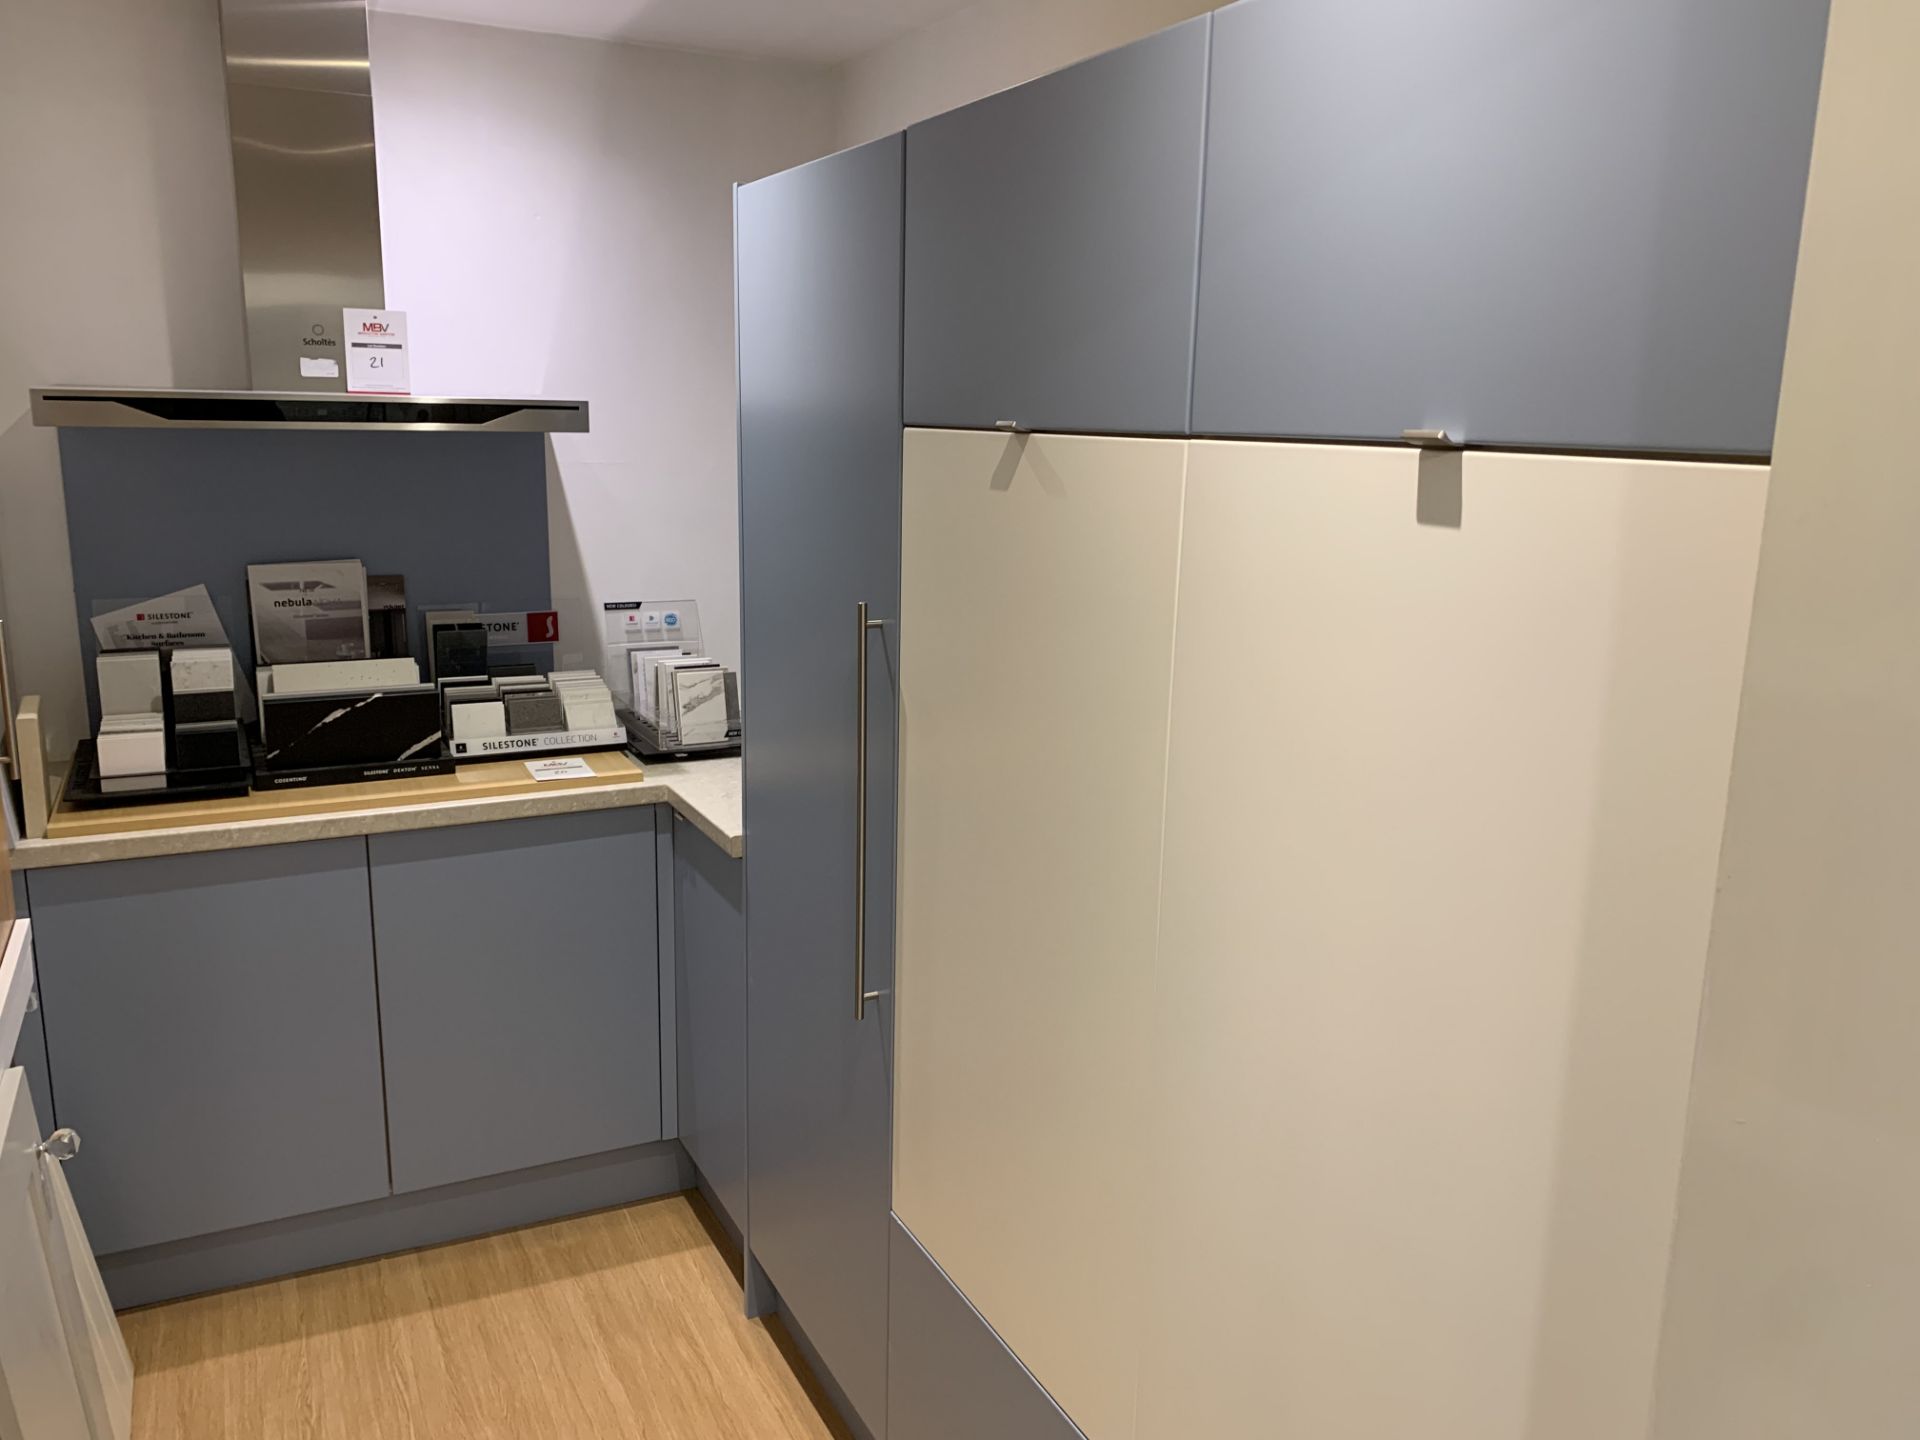 Display L-shaped Utility Room cupboards with laminate worksurface